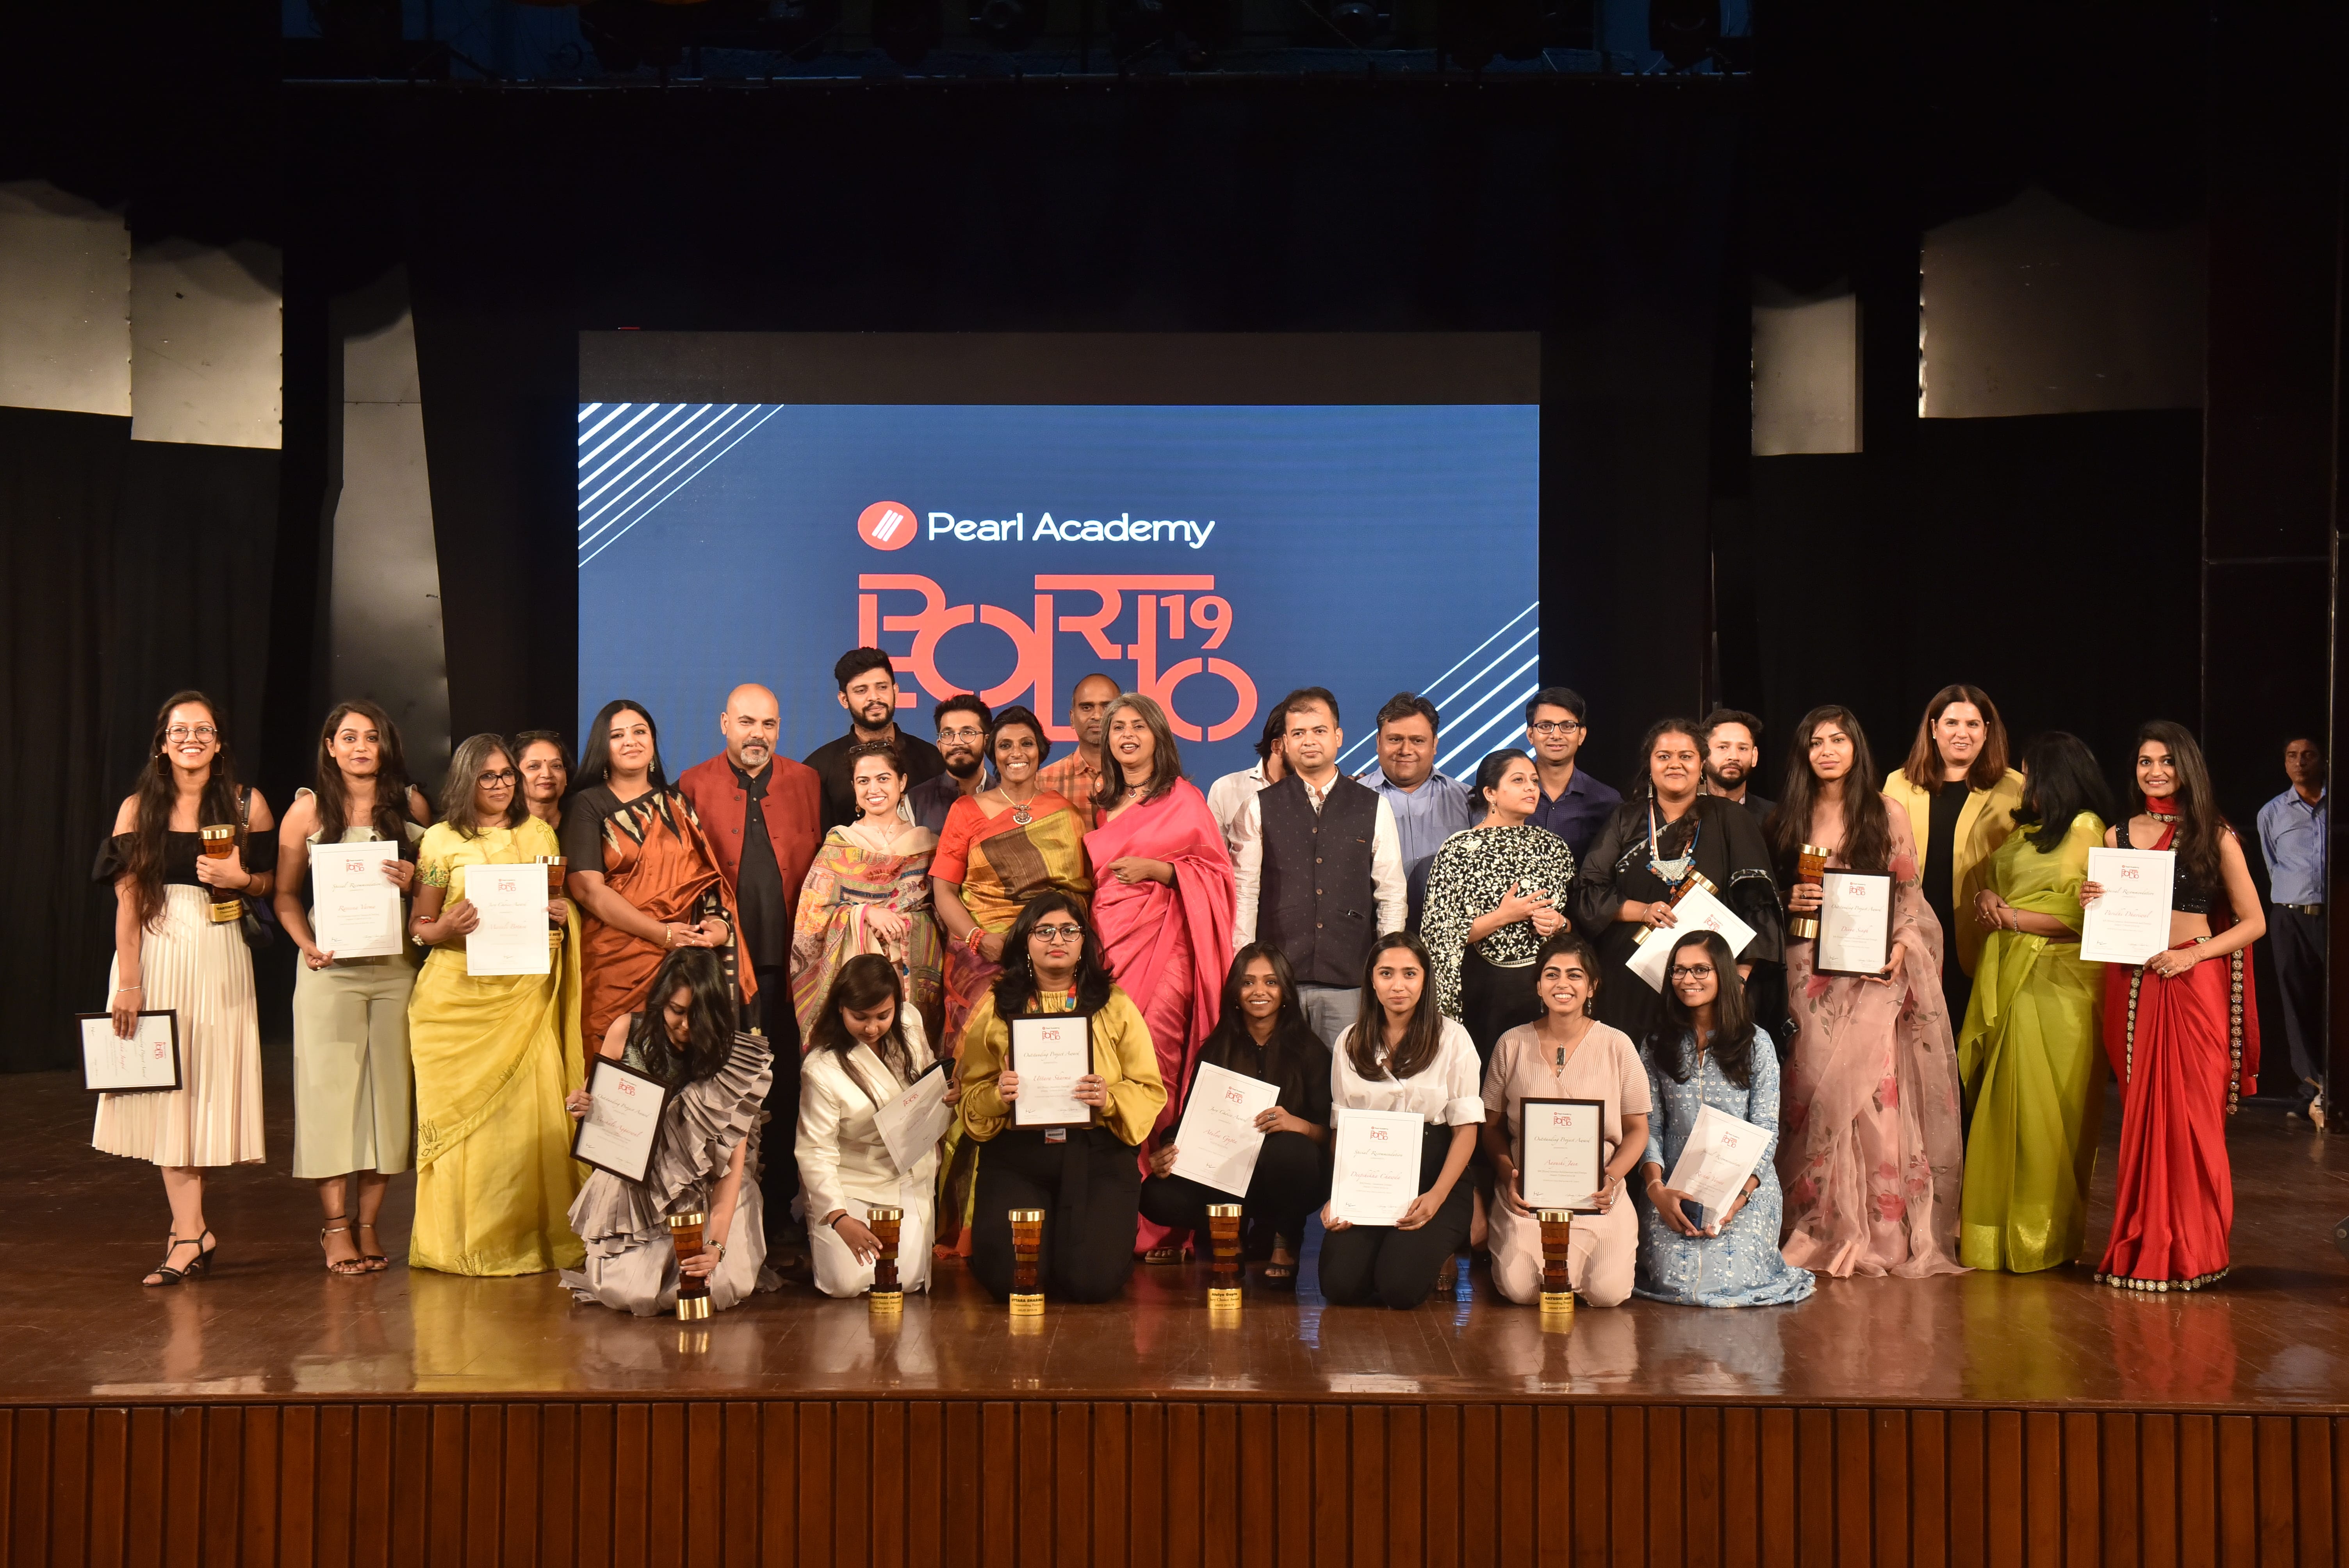 Pearl Academy Jaipur Graduates Showcase Their Outstanding Work Defining the Future of Design and Architecture at Portfolio 2019